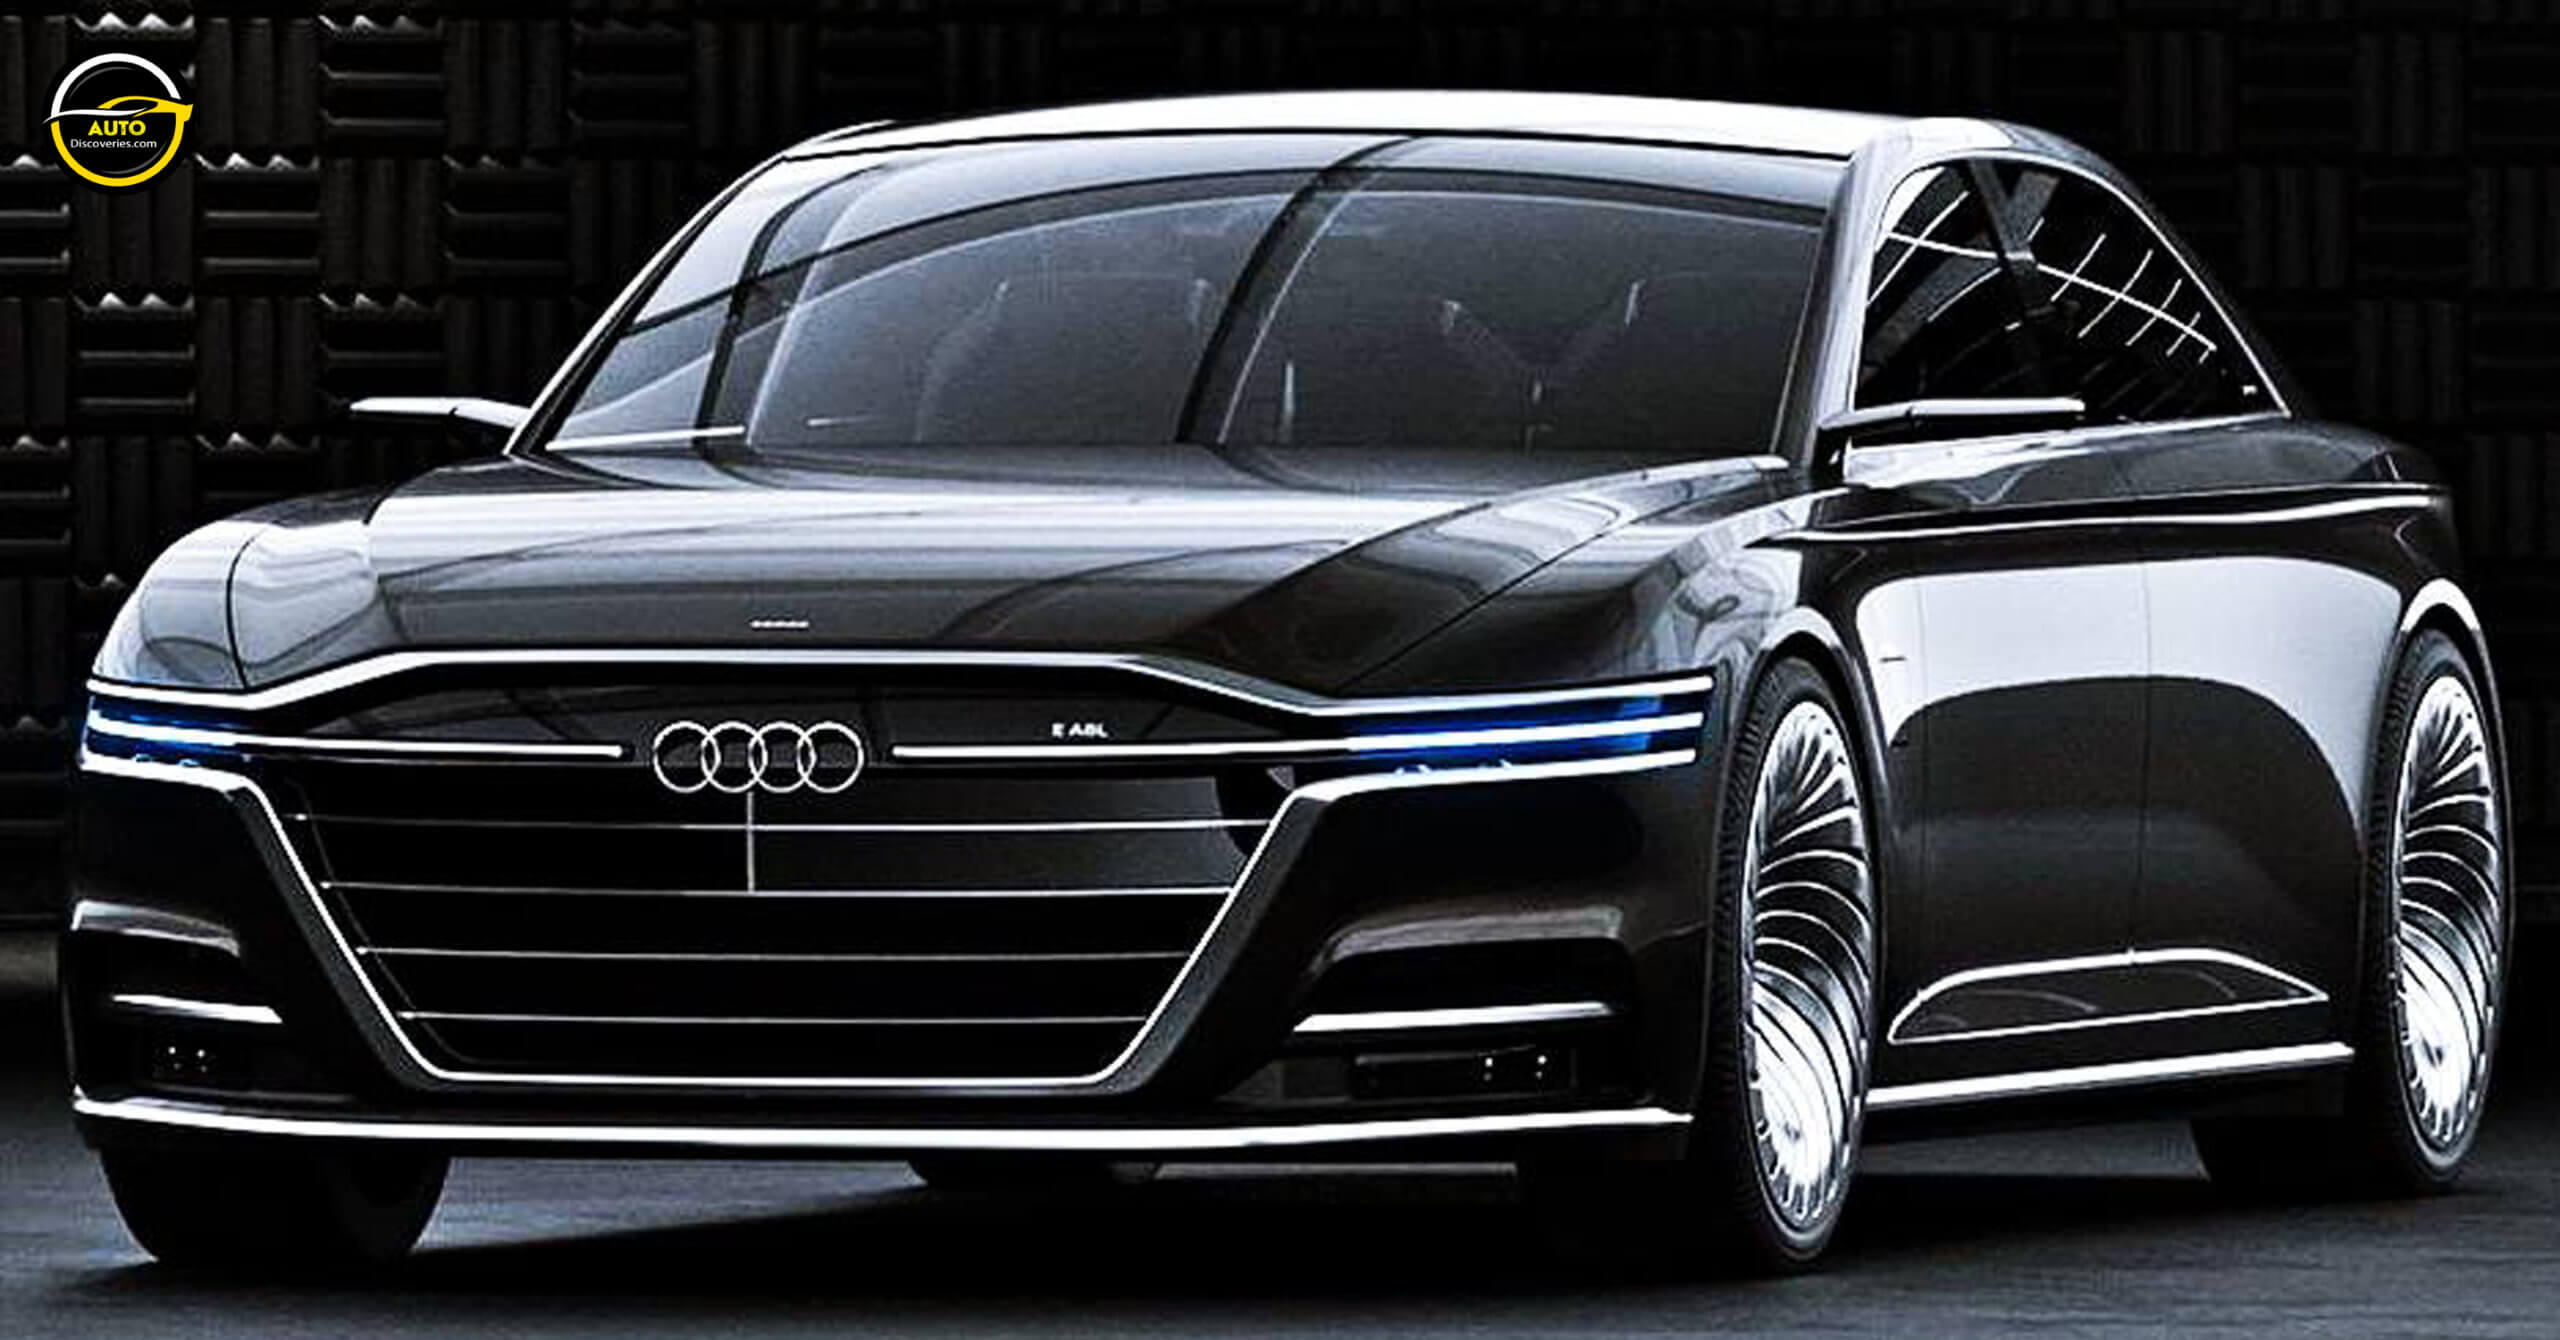 2025 Audi A8L Next Generation Designed By Aven Shi Auto Discoveries